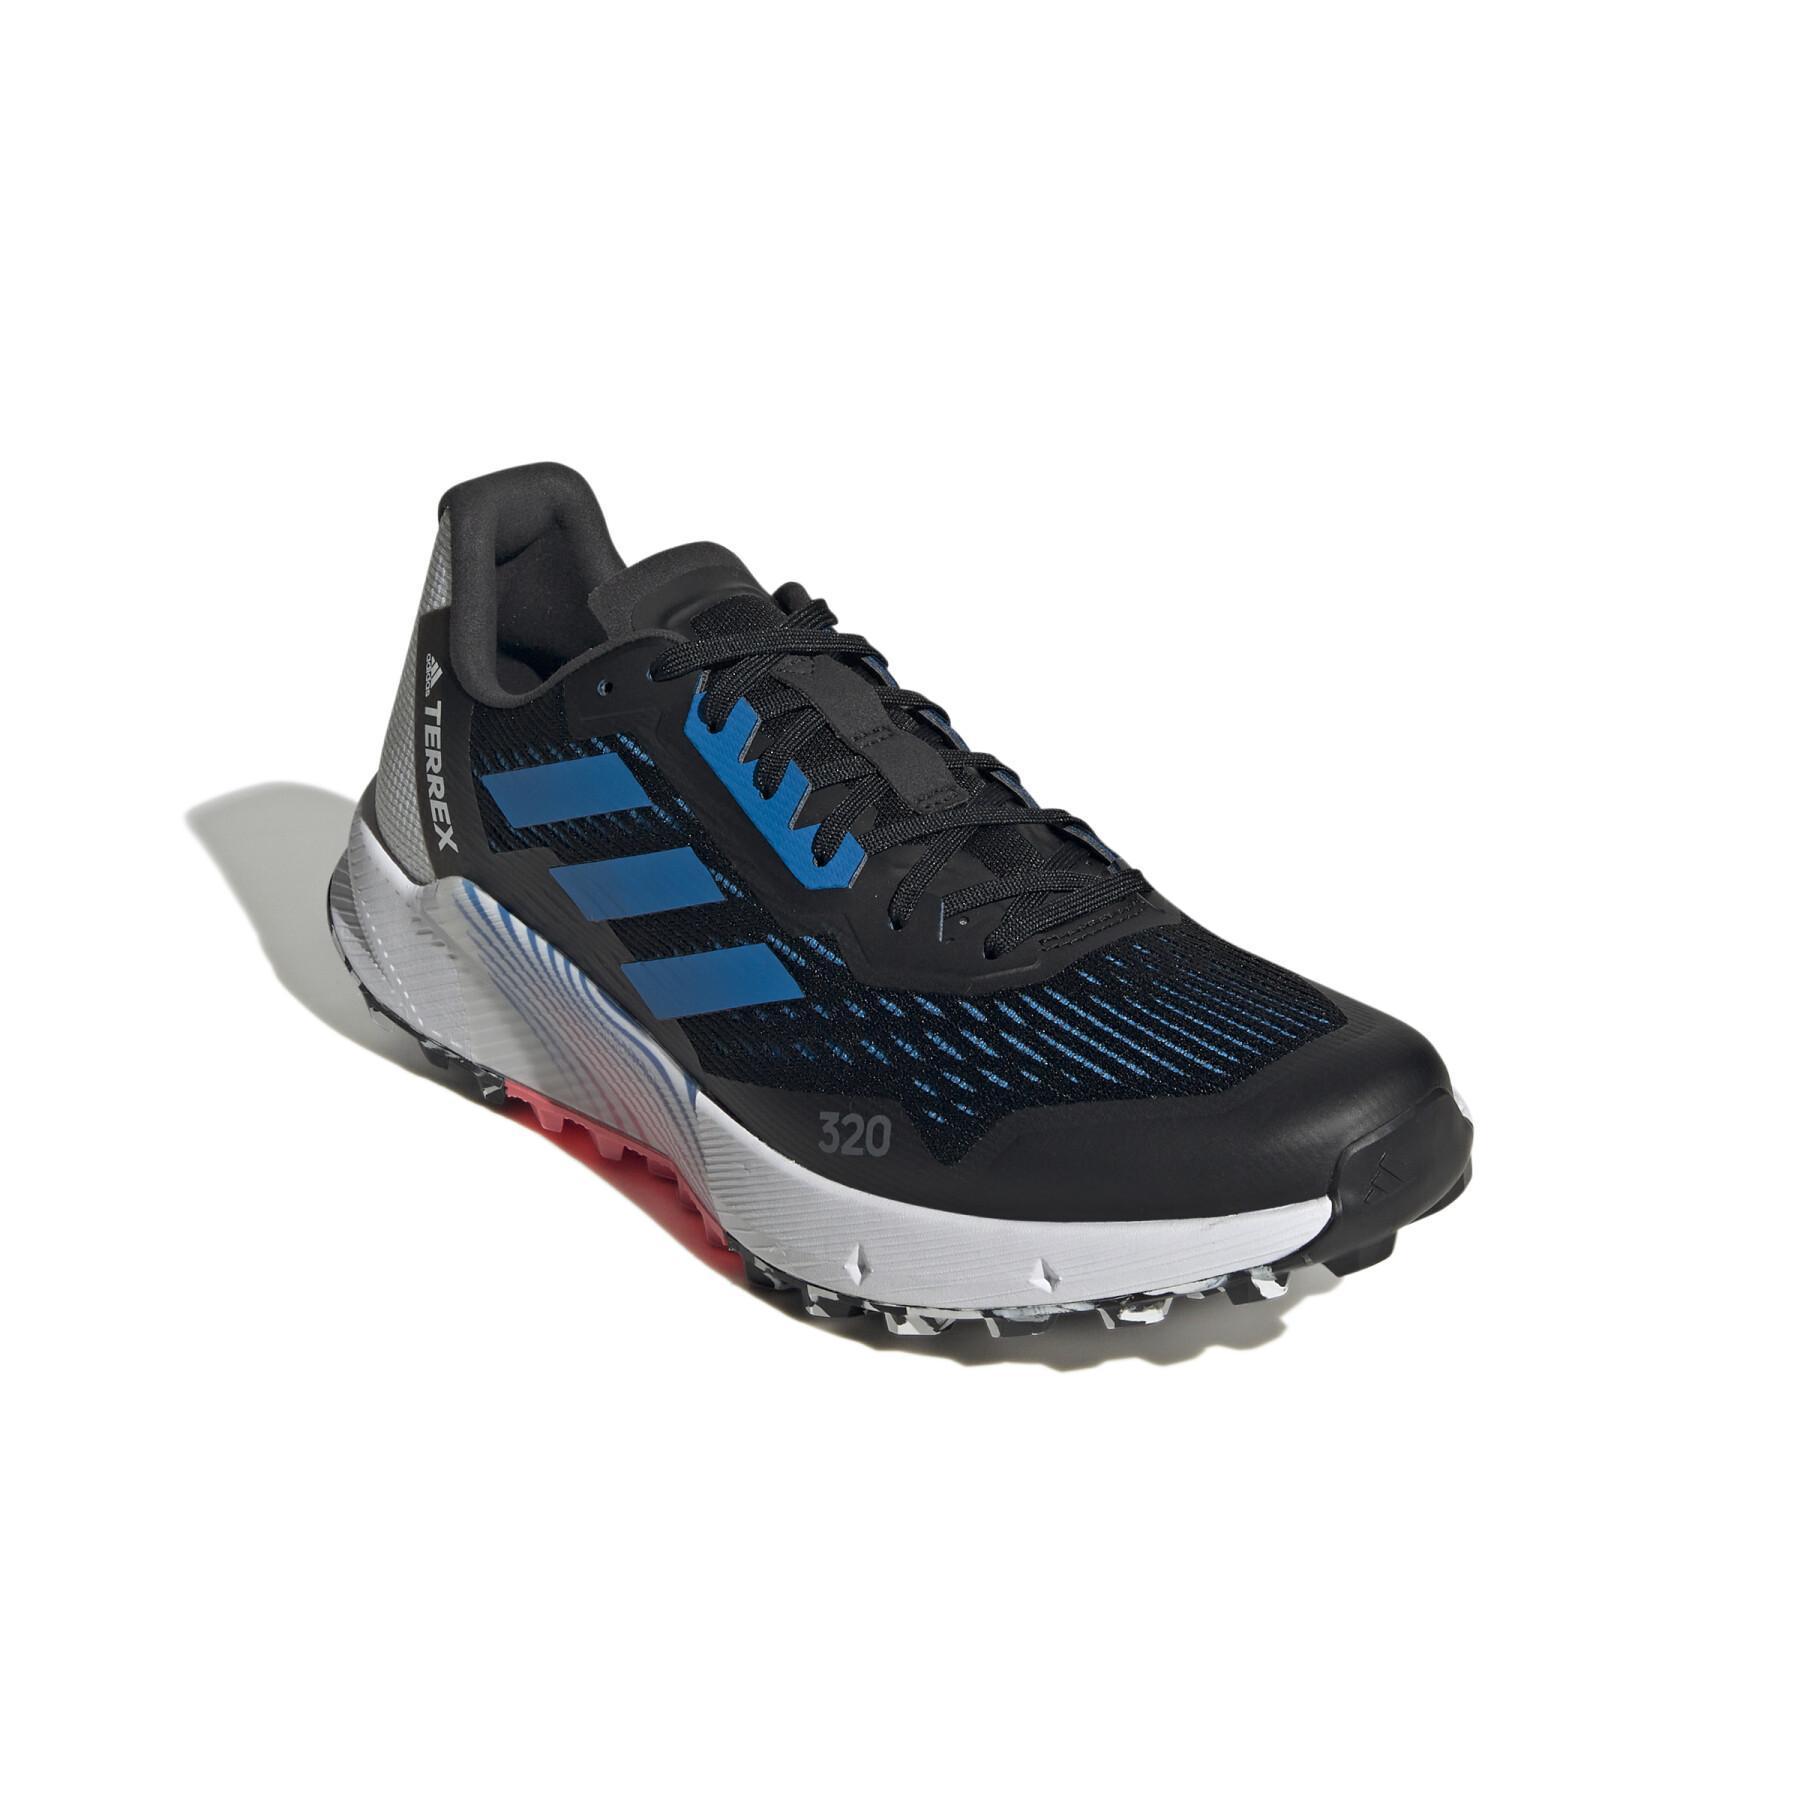 Trail running shoes adidas Terrex agravic flow2